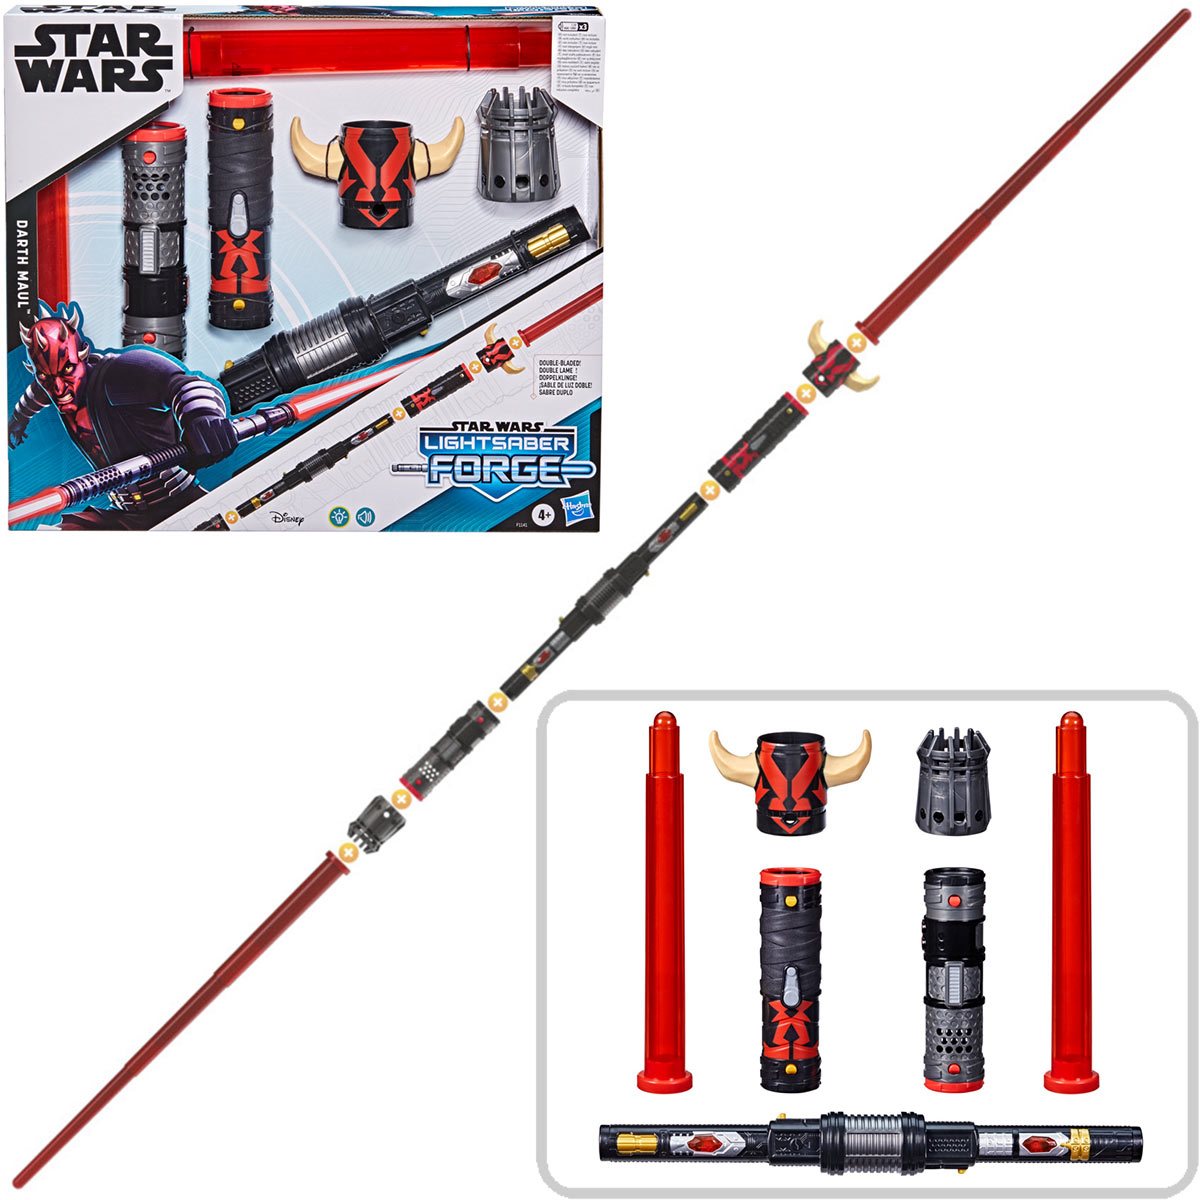 Star Wars Lightsaber Forge Maul Double-Bladed Electronic Red Lightsaber